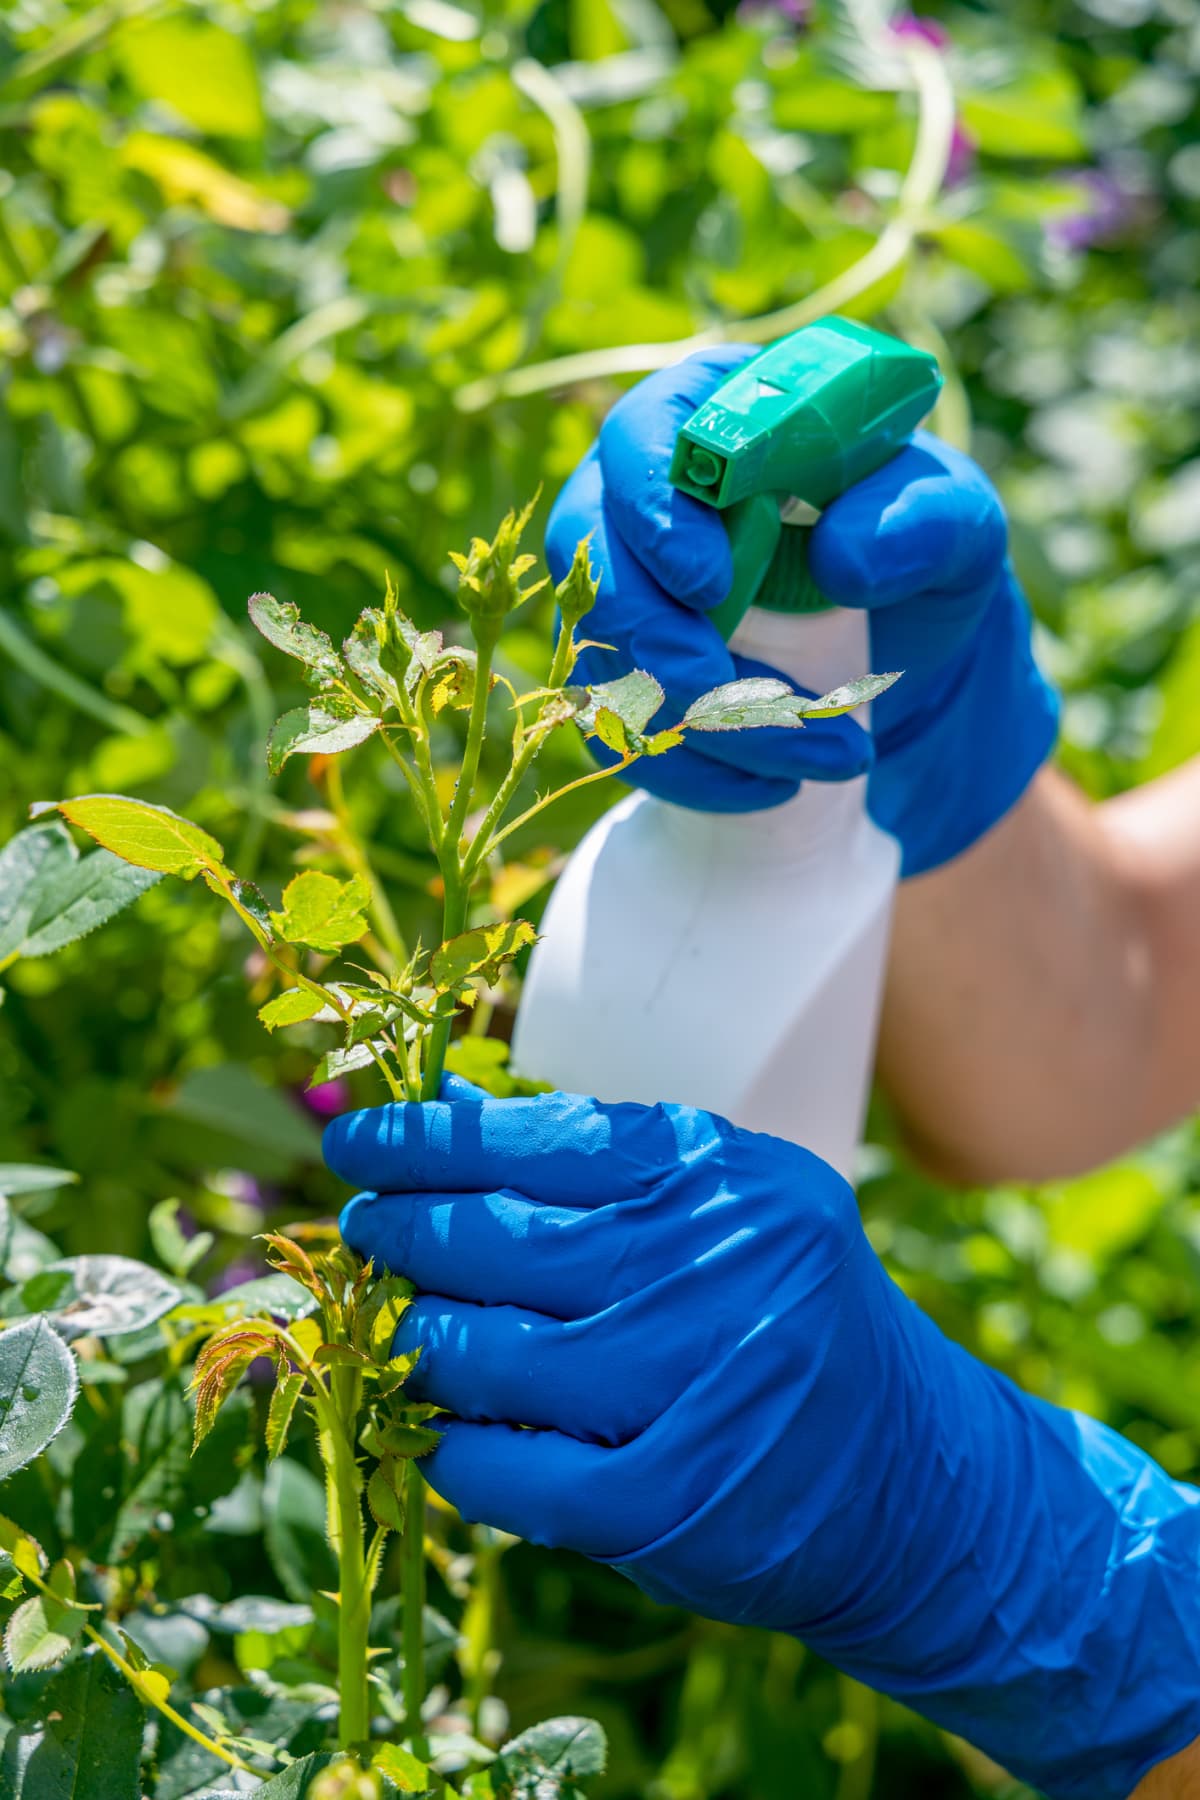 gardener treats roses in the garden with a garden sprayer from insect pests. High quality photo